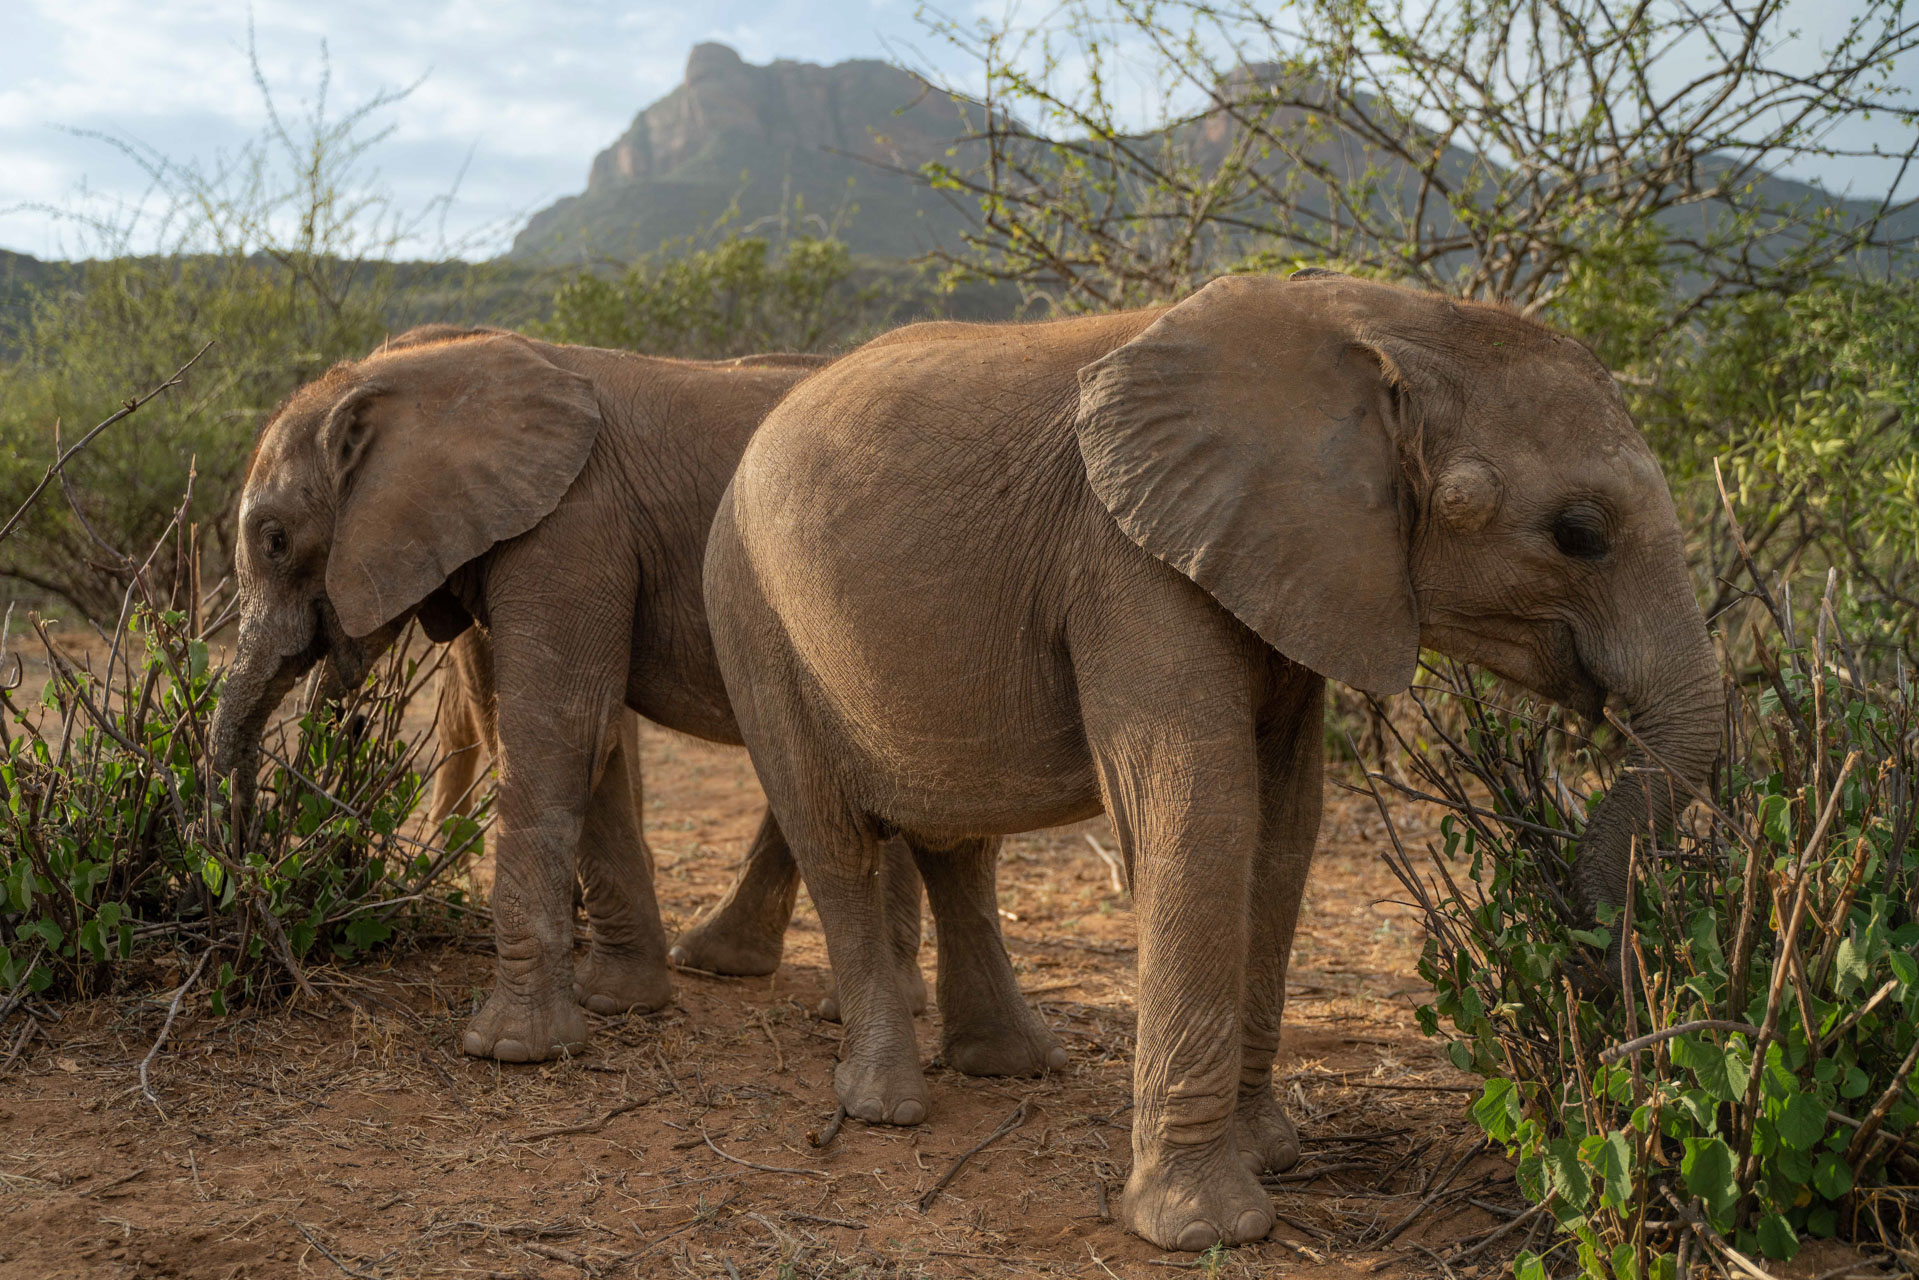 The beautiful Matthews Range is now home for these two orphans